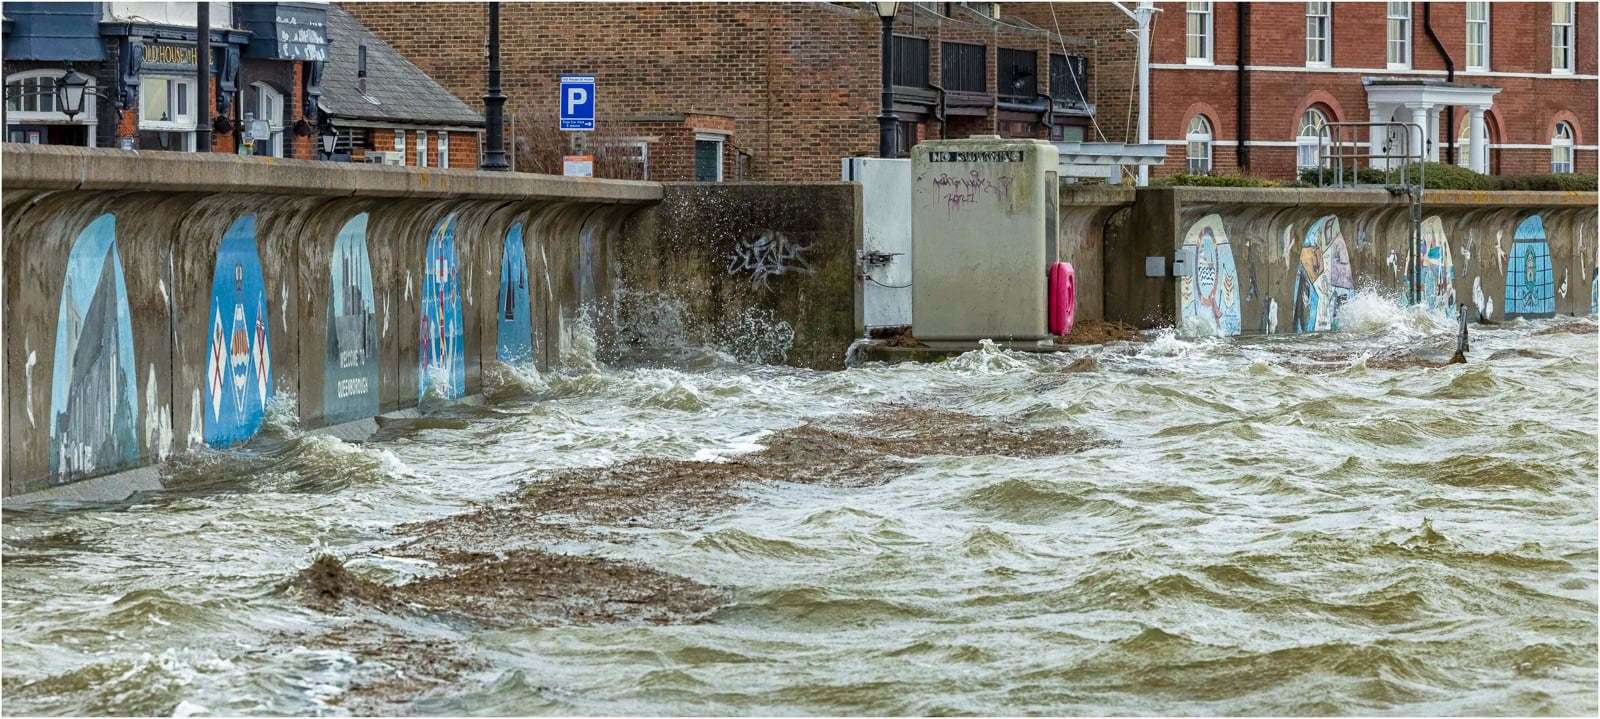 High tide at Queenborough, Sheppey. The town was saved by the flood gates. Picture: Henry Slack